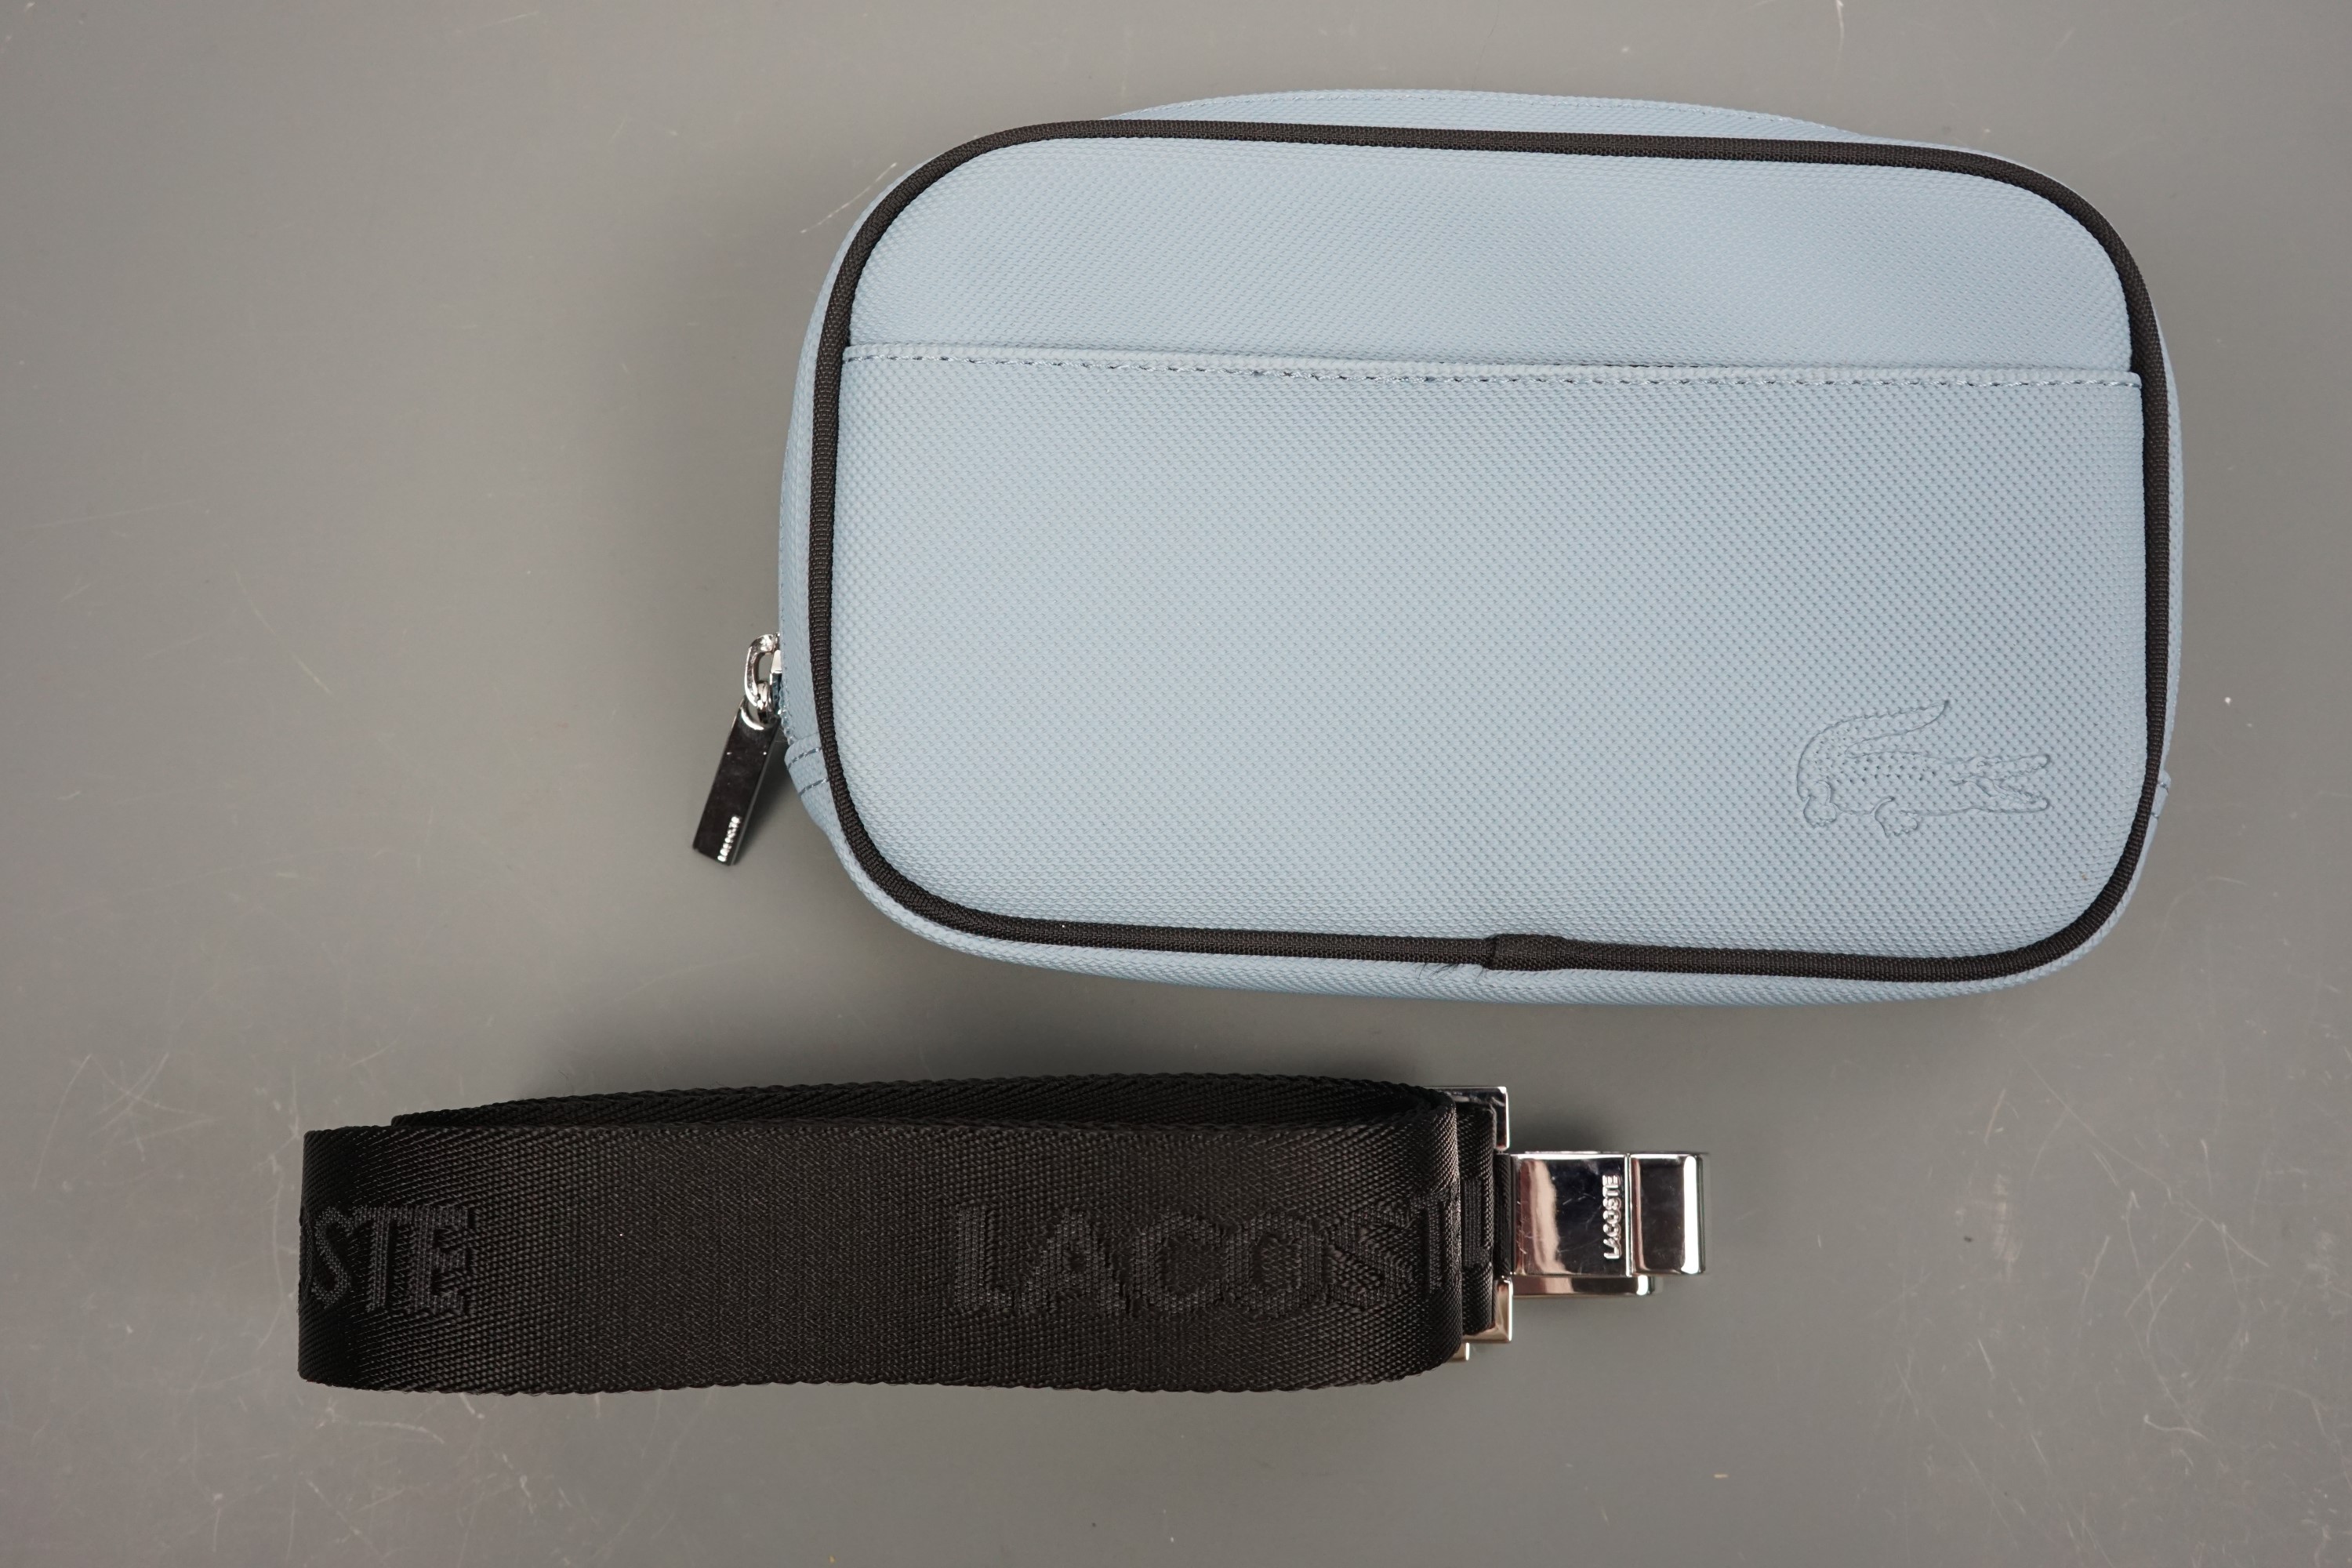 An "as new" unused Lacoste Classic II convertible clutch / hip / bum / waist / shoulder bag in